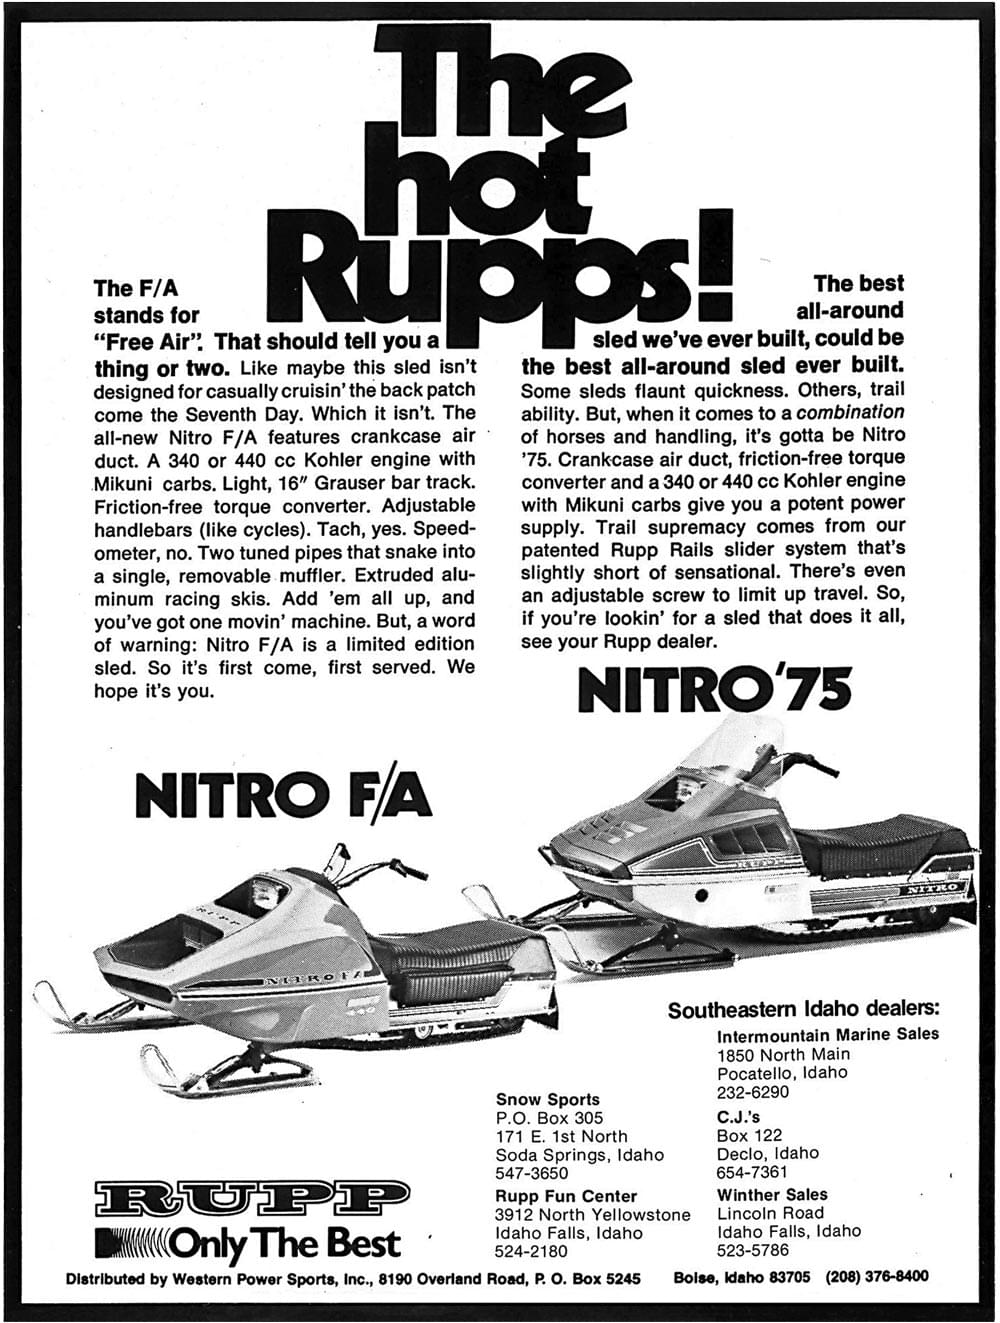 black and white Rupp advertisement from the 70s